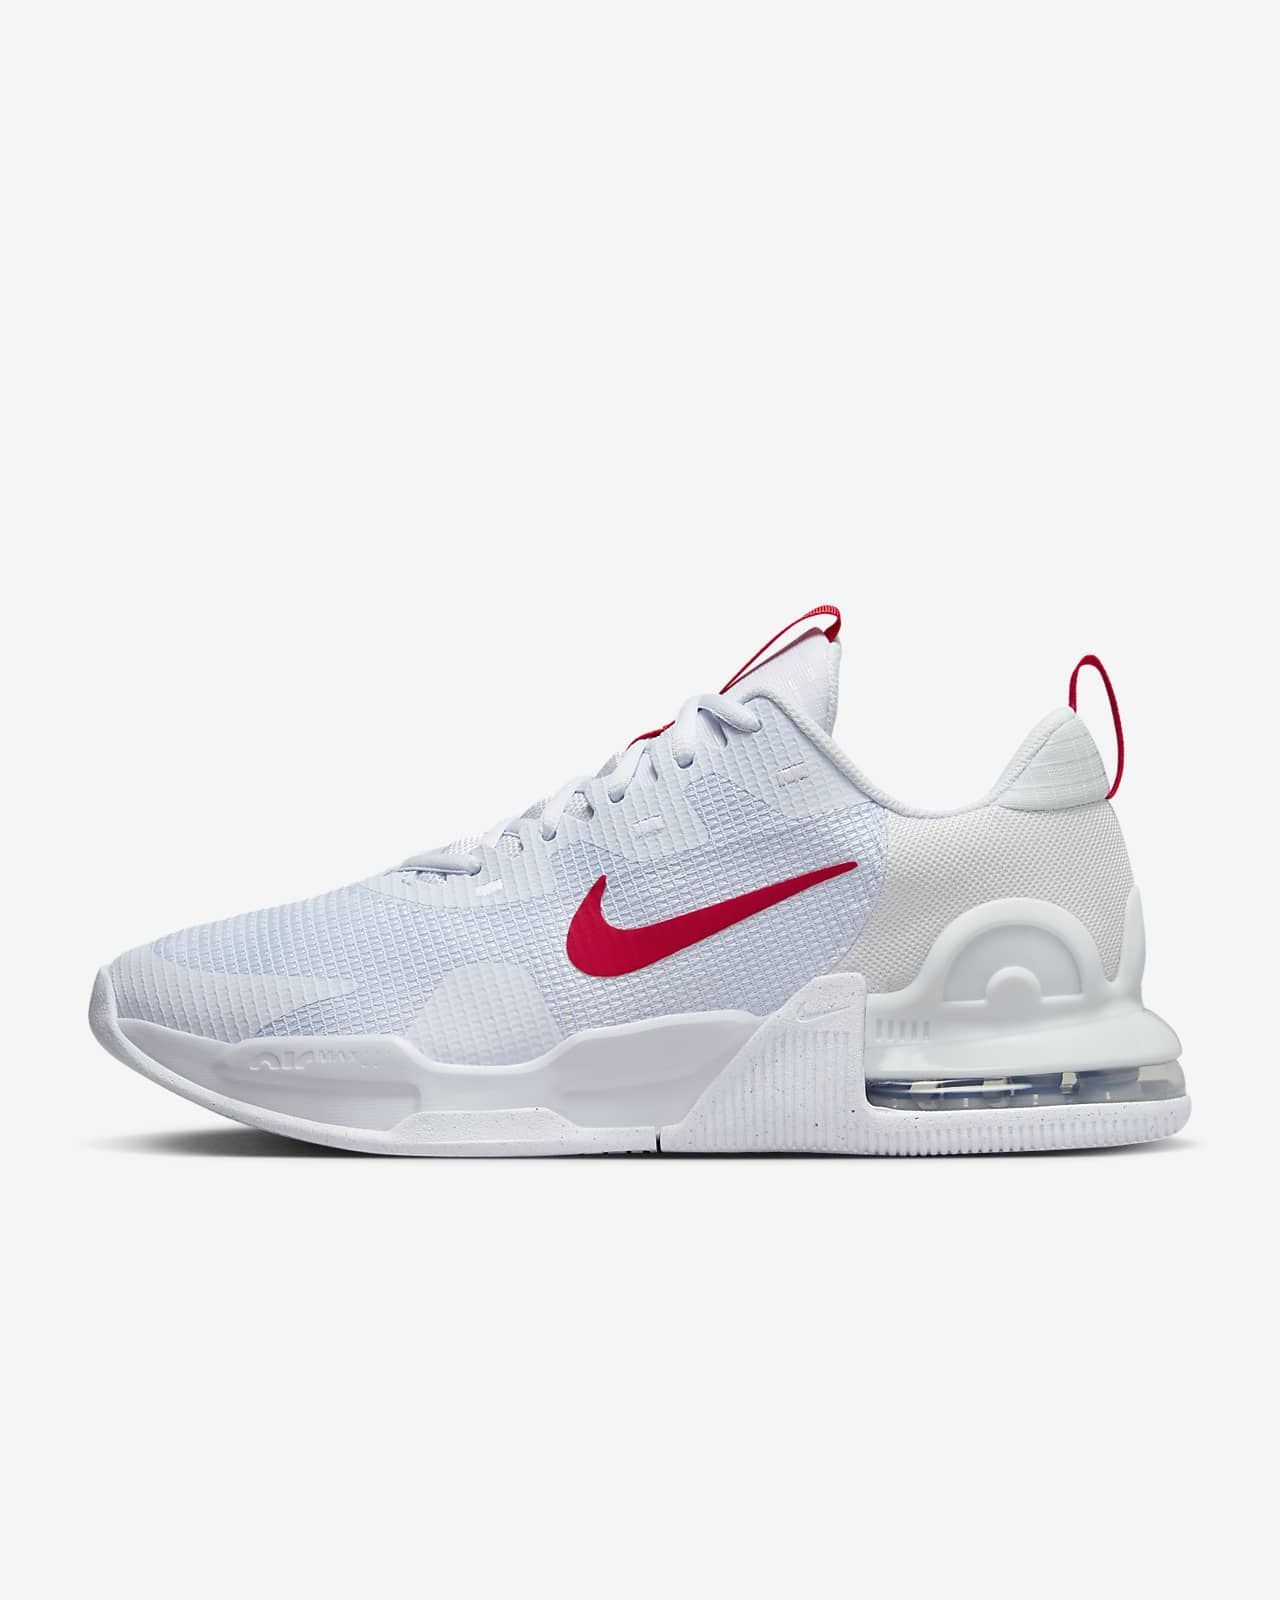 Nike Air Max Alpha Trainer 5 Men's Workout Shoes. Nike.com | Nike (US)